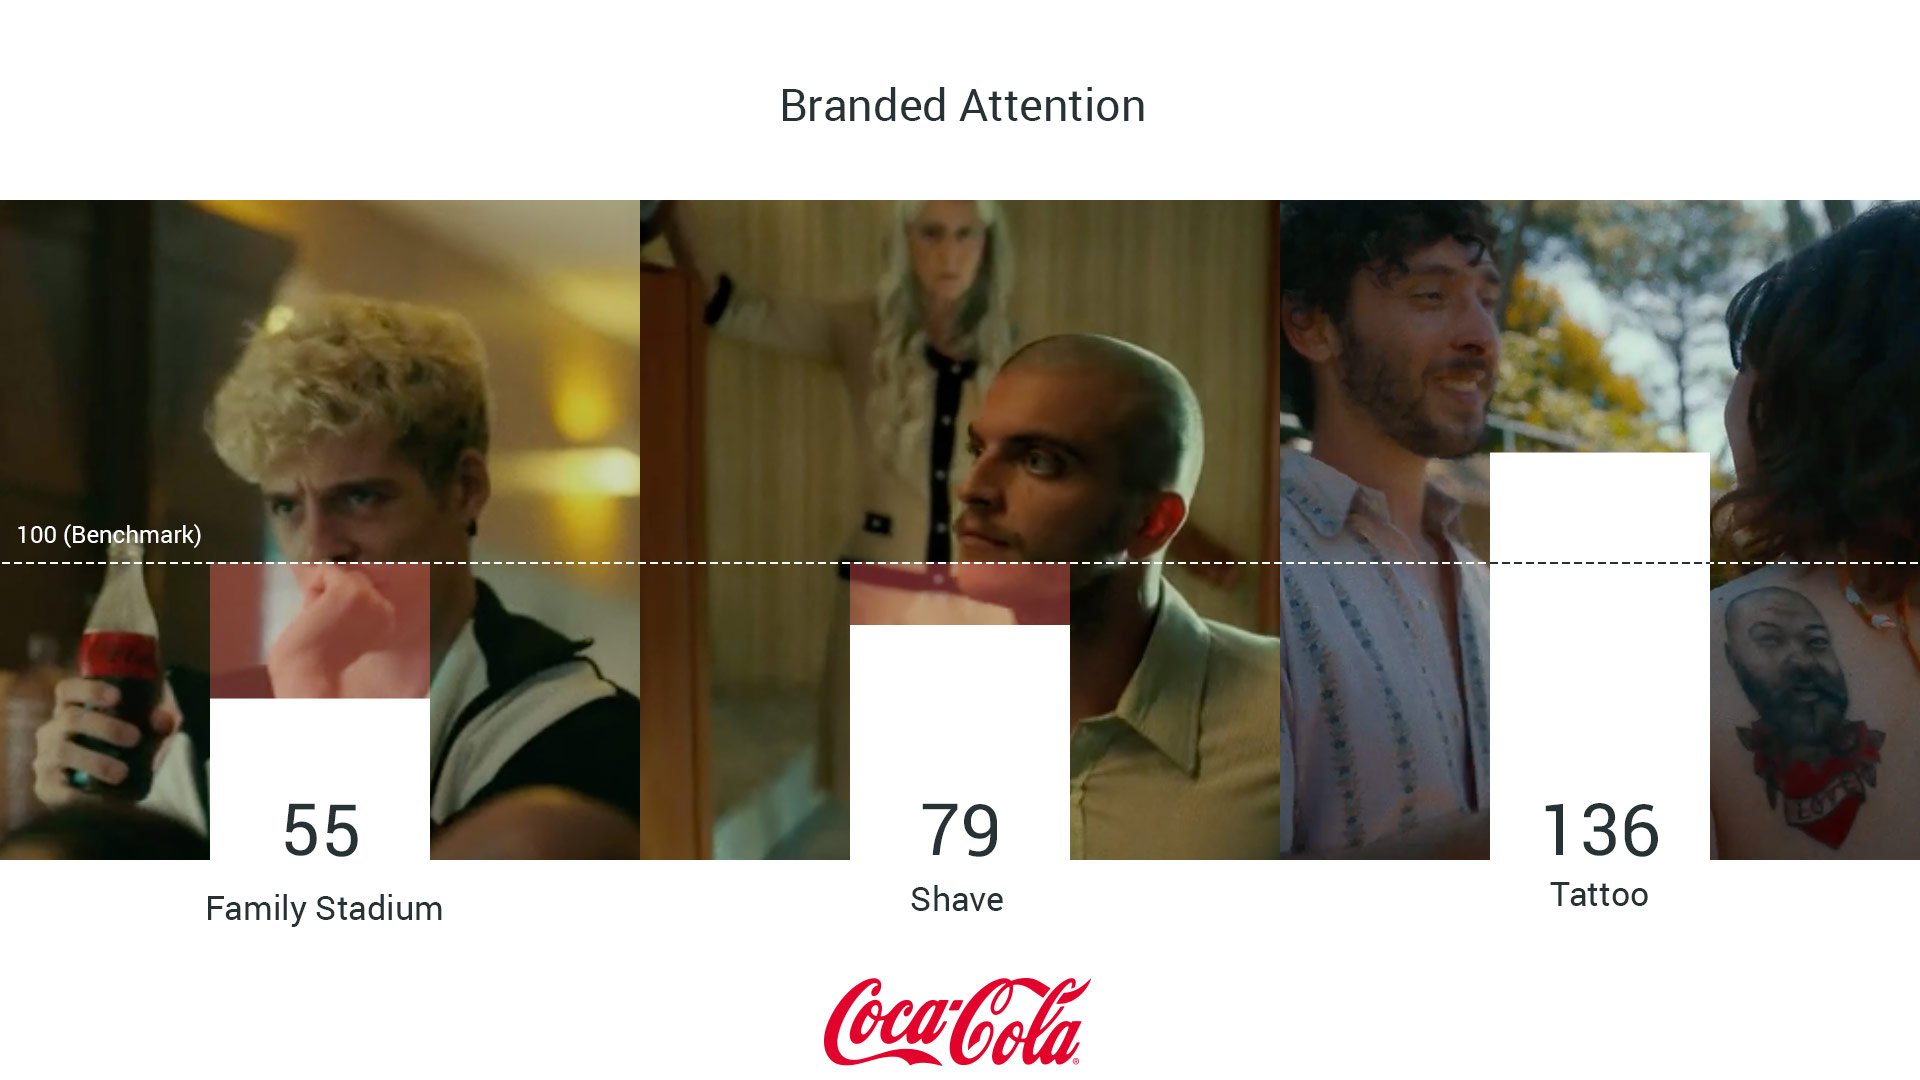 Coca-Cola - 3 Ads (Branded Attention)